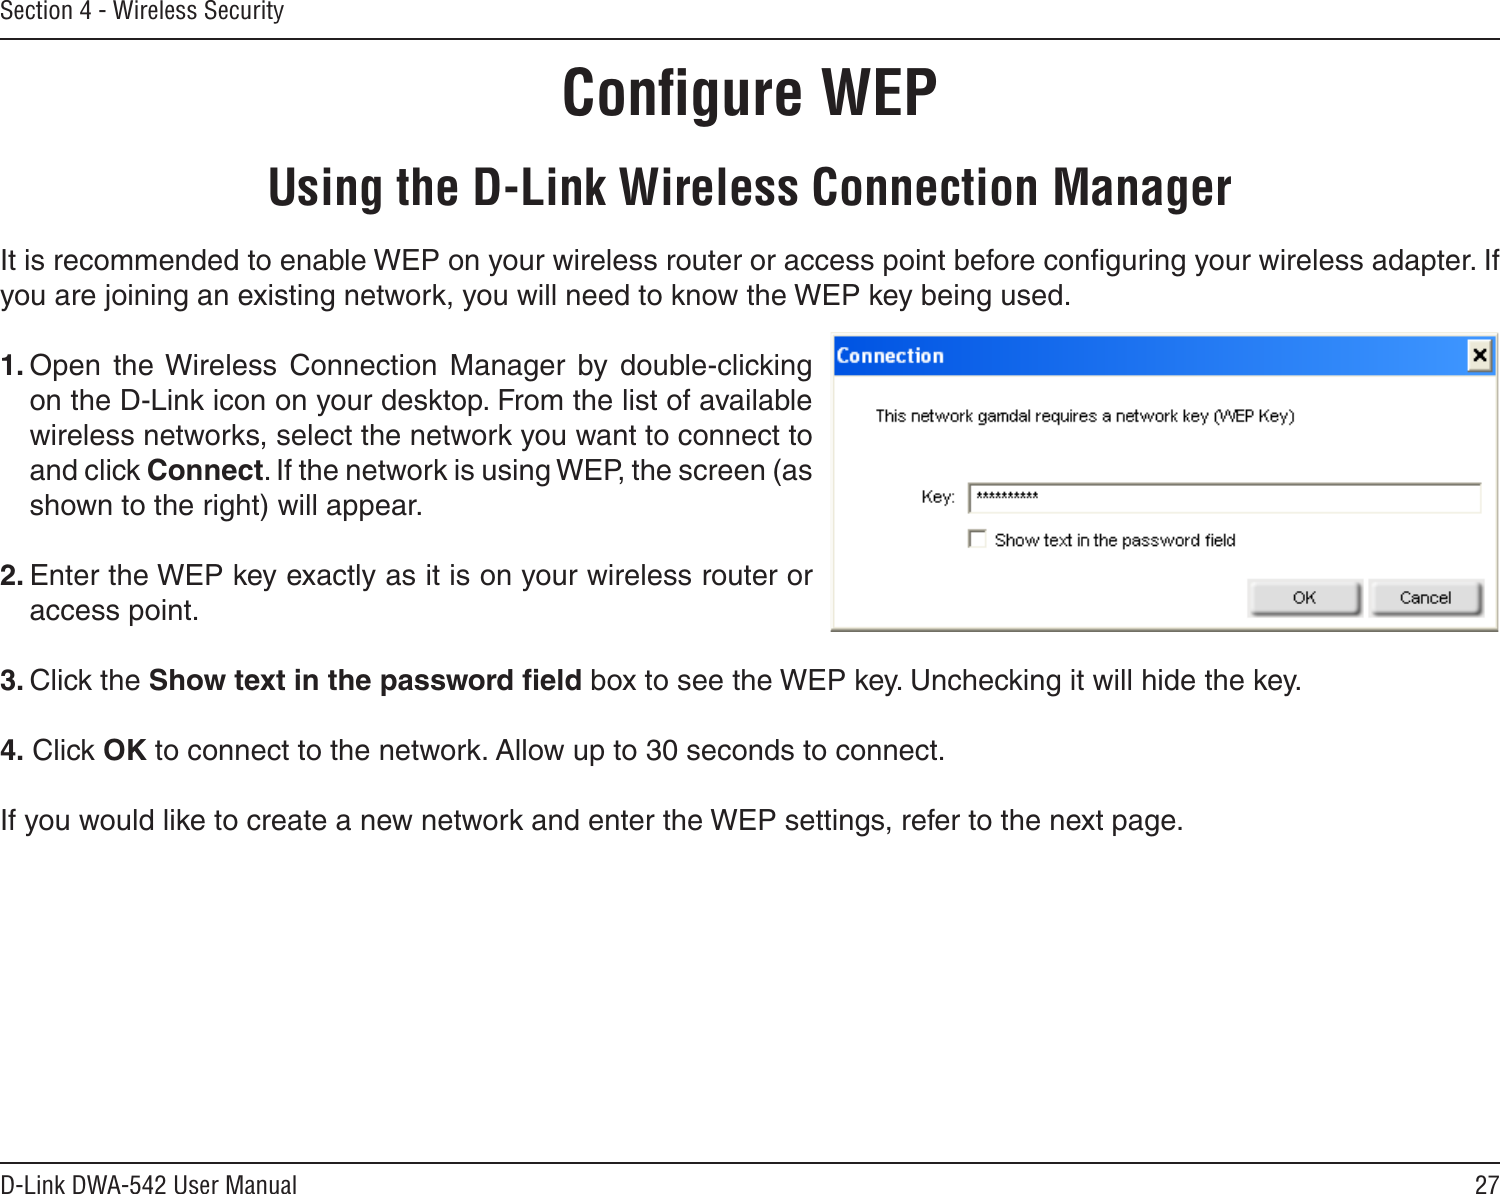 27D-Link DWA-542 User ManualSection 4 - Wireless SecurityConﬁgure WEPUsing the D-Link Wireless Connection ManagerIt is recommended to enable WEP on your wireless router or access point before conﬁguring your wireless adapter. If you are joining an existing network, you will need to know the WEP key being used.1. Open  the Wireless  Connection  Manager  by  double-clicking on the D-Link icon on your desktop. From the list of available wireless networks, select the network you want to connect to and click Connect. If the network is using WEP, the screen (as shown to the right) will appear. 2. Enter the WEP key exactly as it is on your wireless router or access point.3. Click the Show text in the password ﬁeld box to see the WEP key. Unchecking it will hide the key.4. Click OK to connect to the network. Allow up to 30 seconds to connect.If you would like to create a new network and enter the WEP settings, refer to the next page.